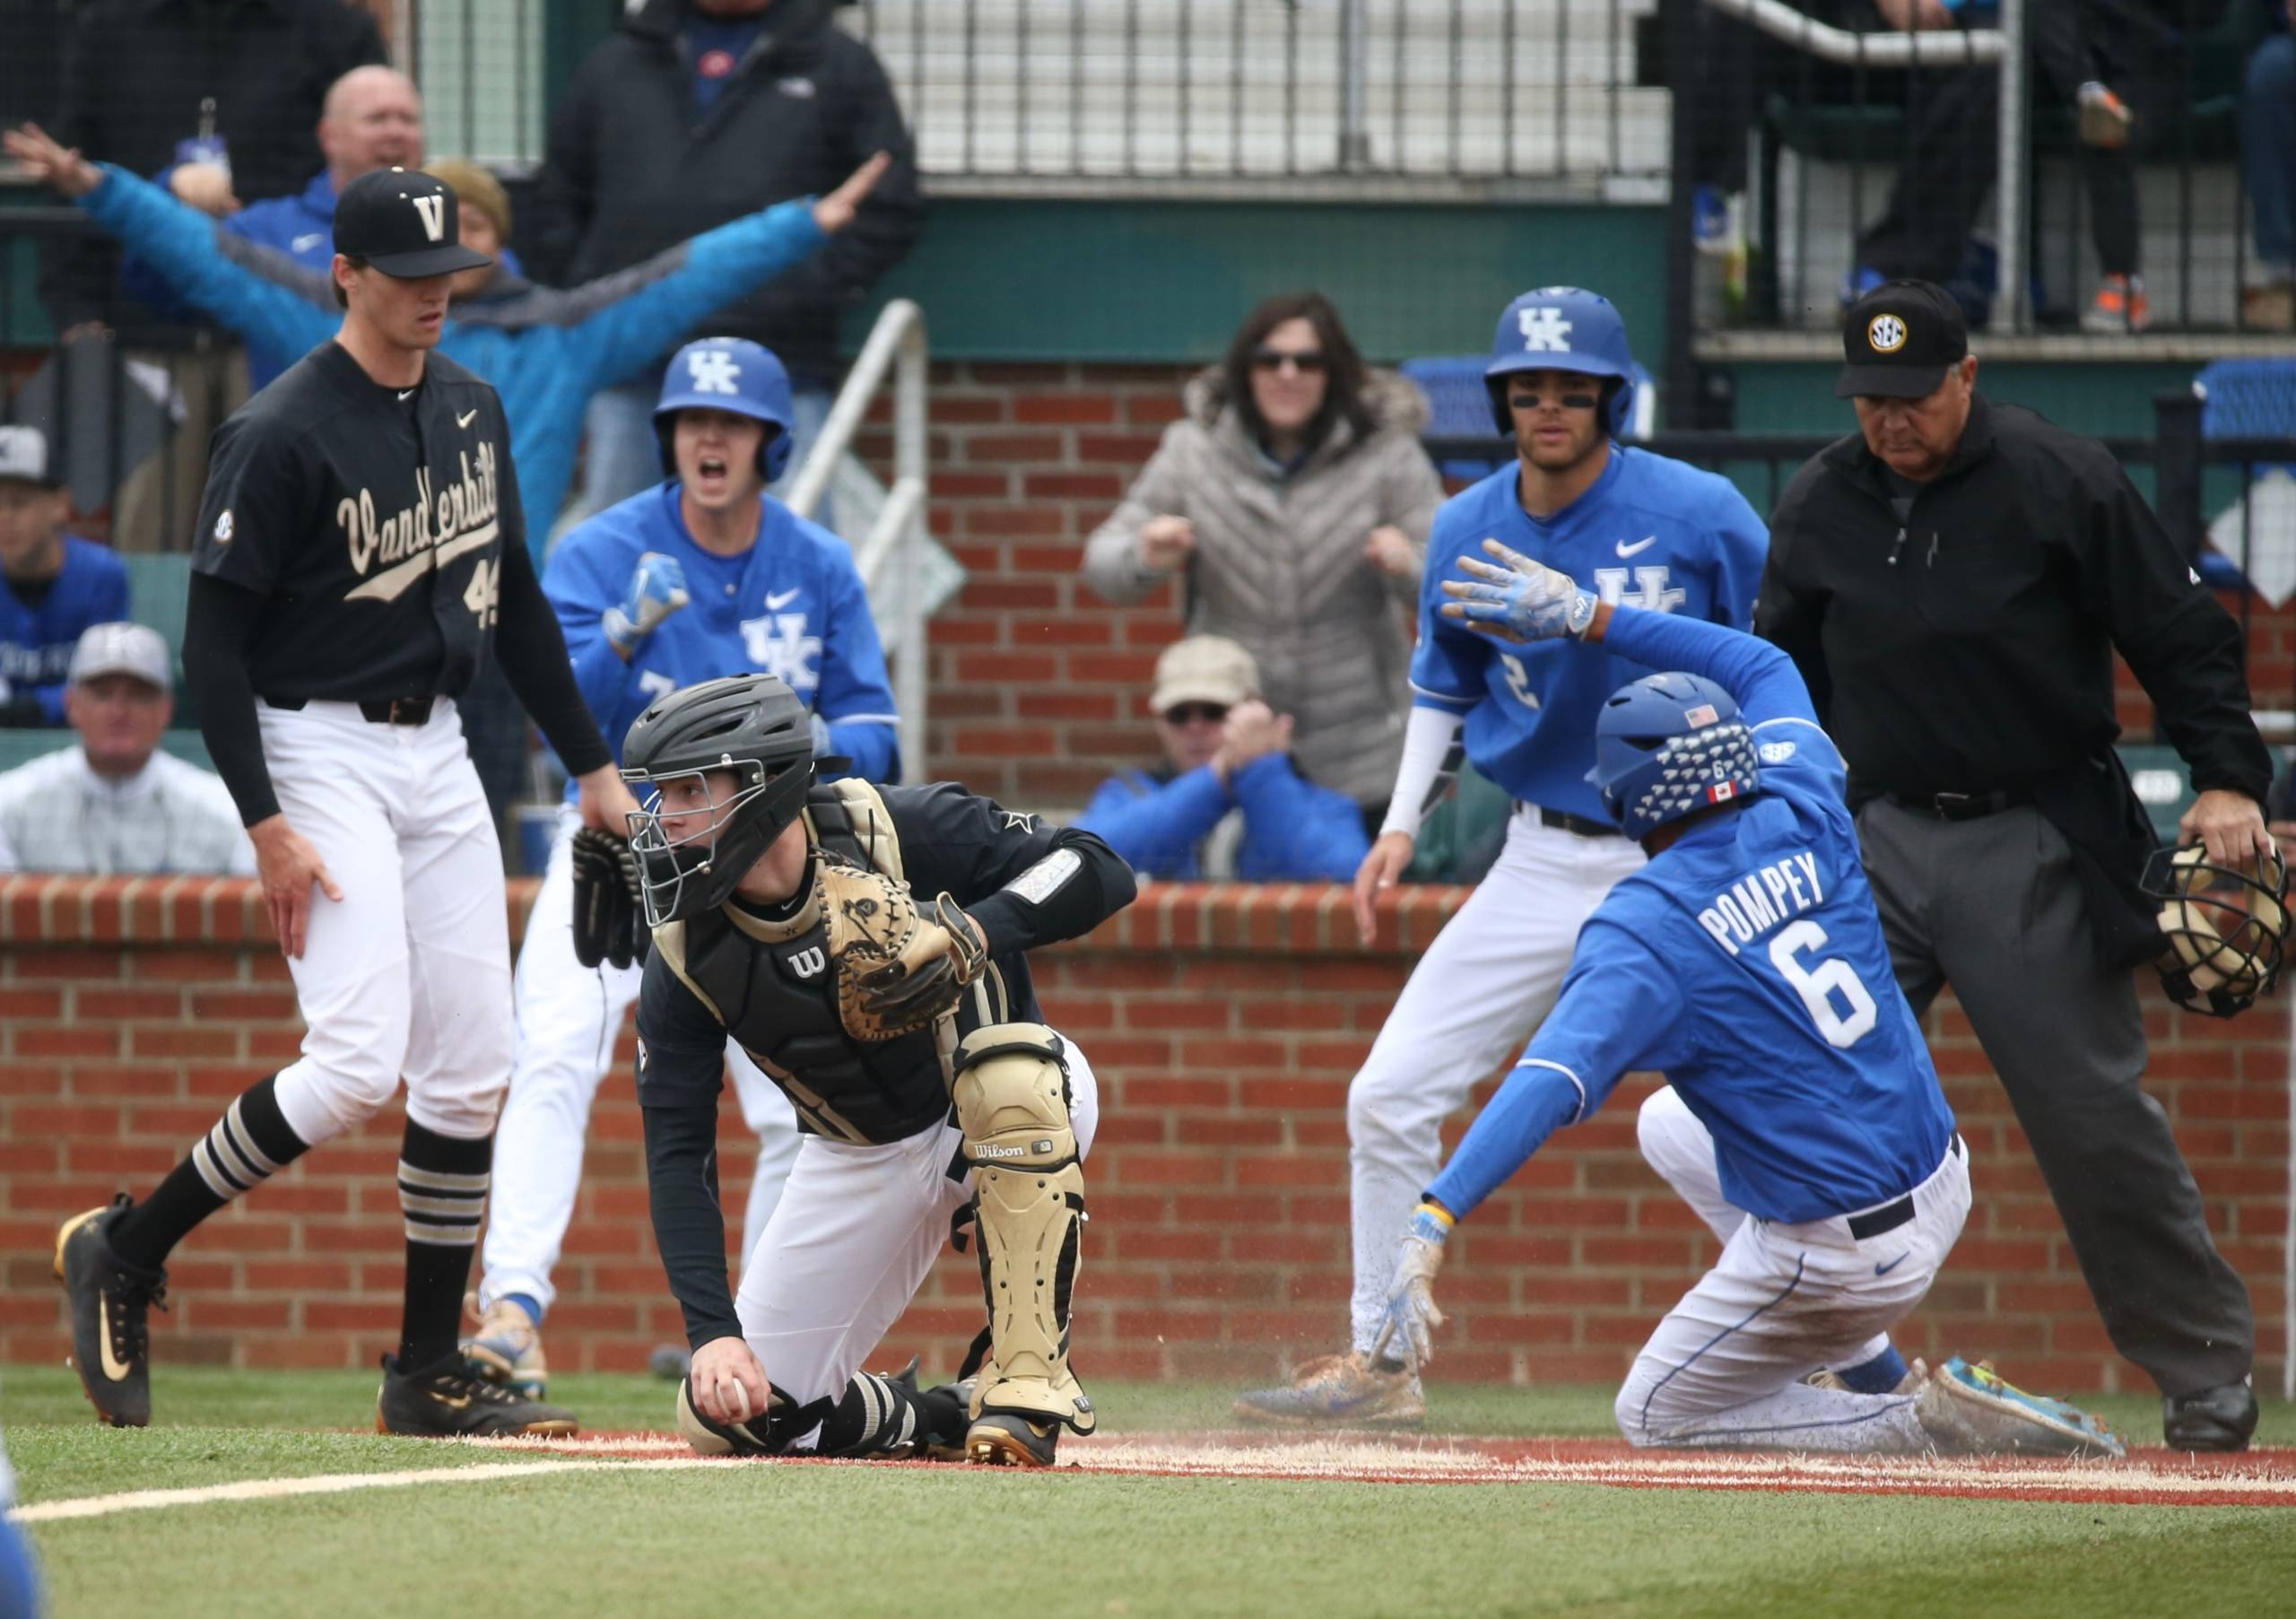 Early Offense, Logue’s Pitching Clinch Series Win Over Vanderbilt